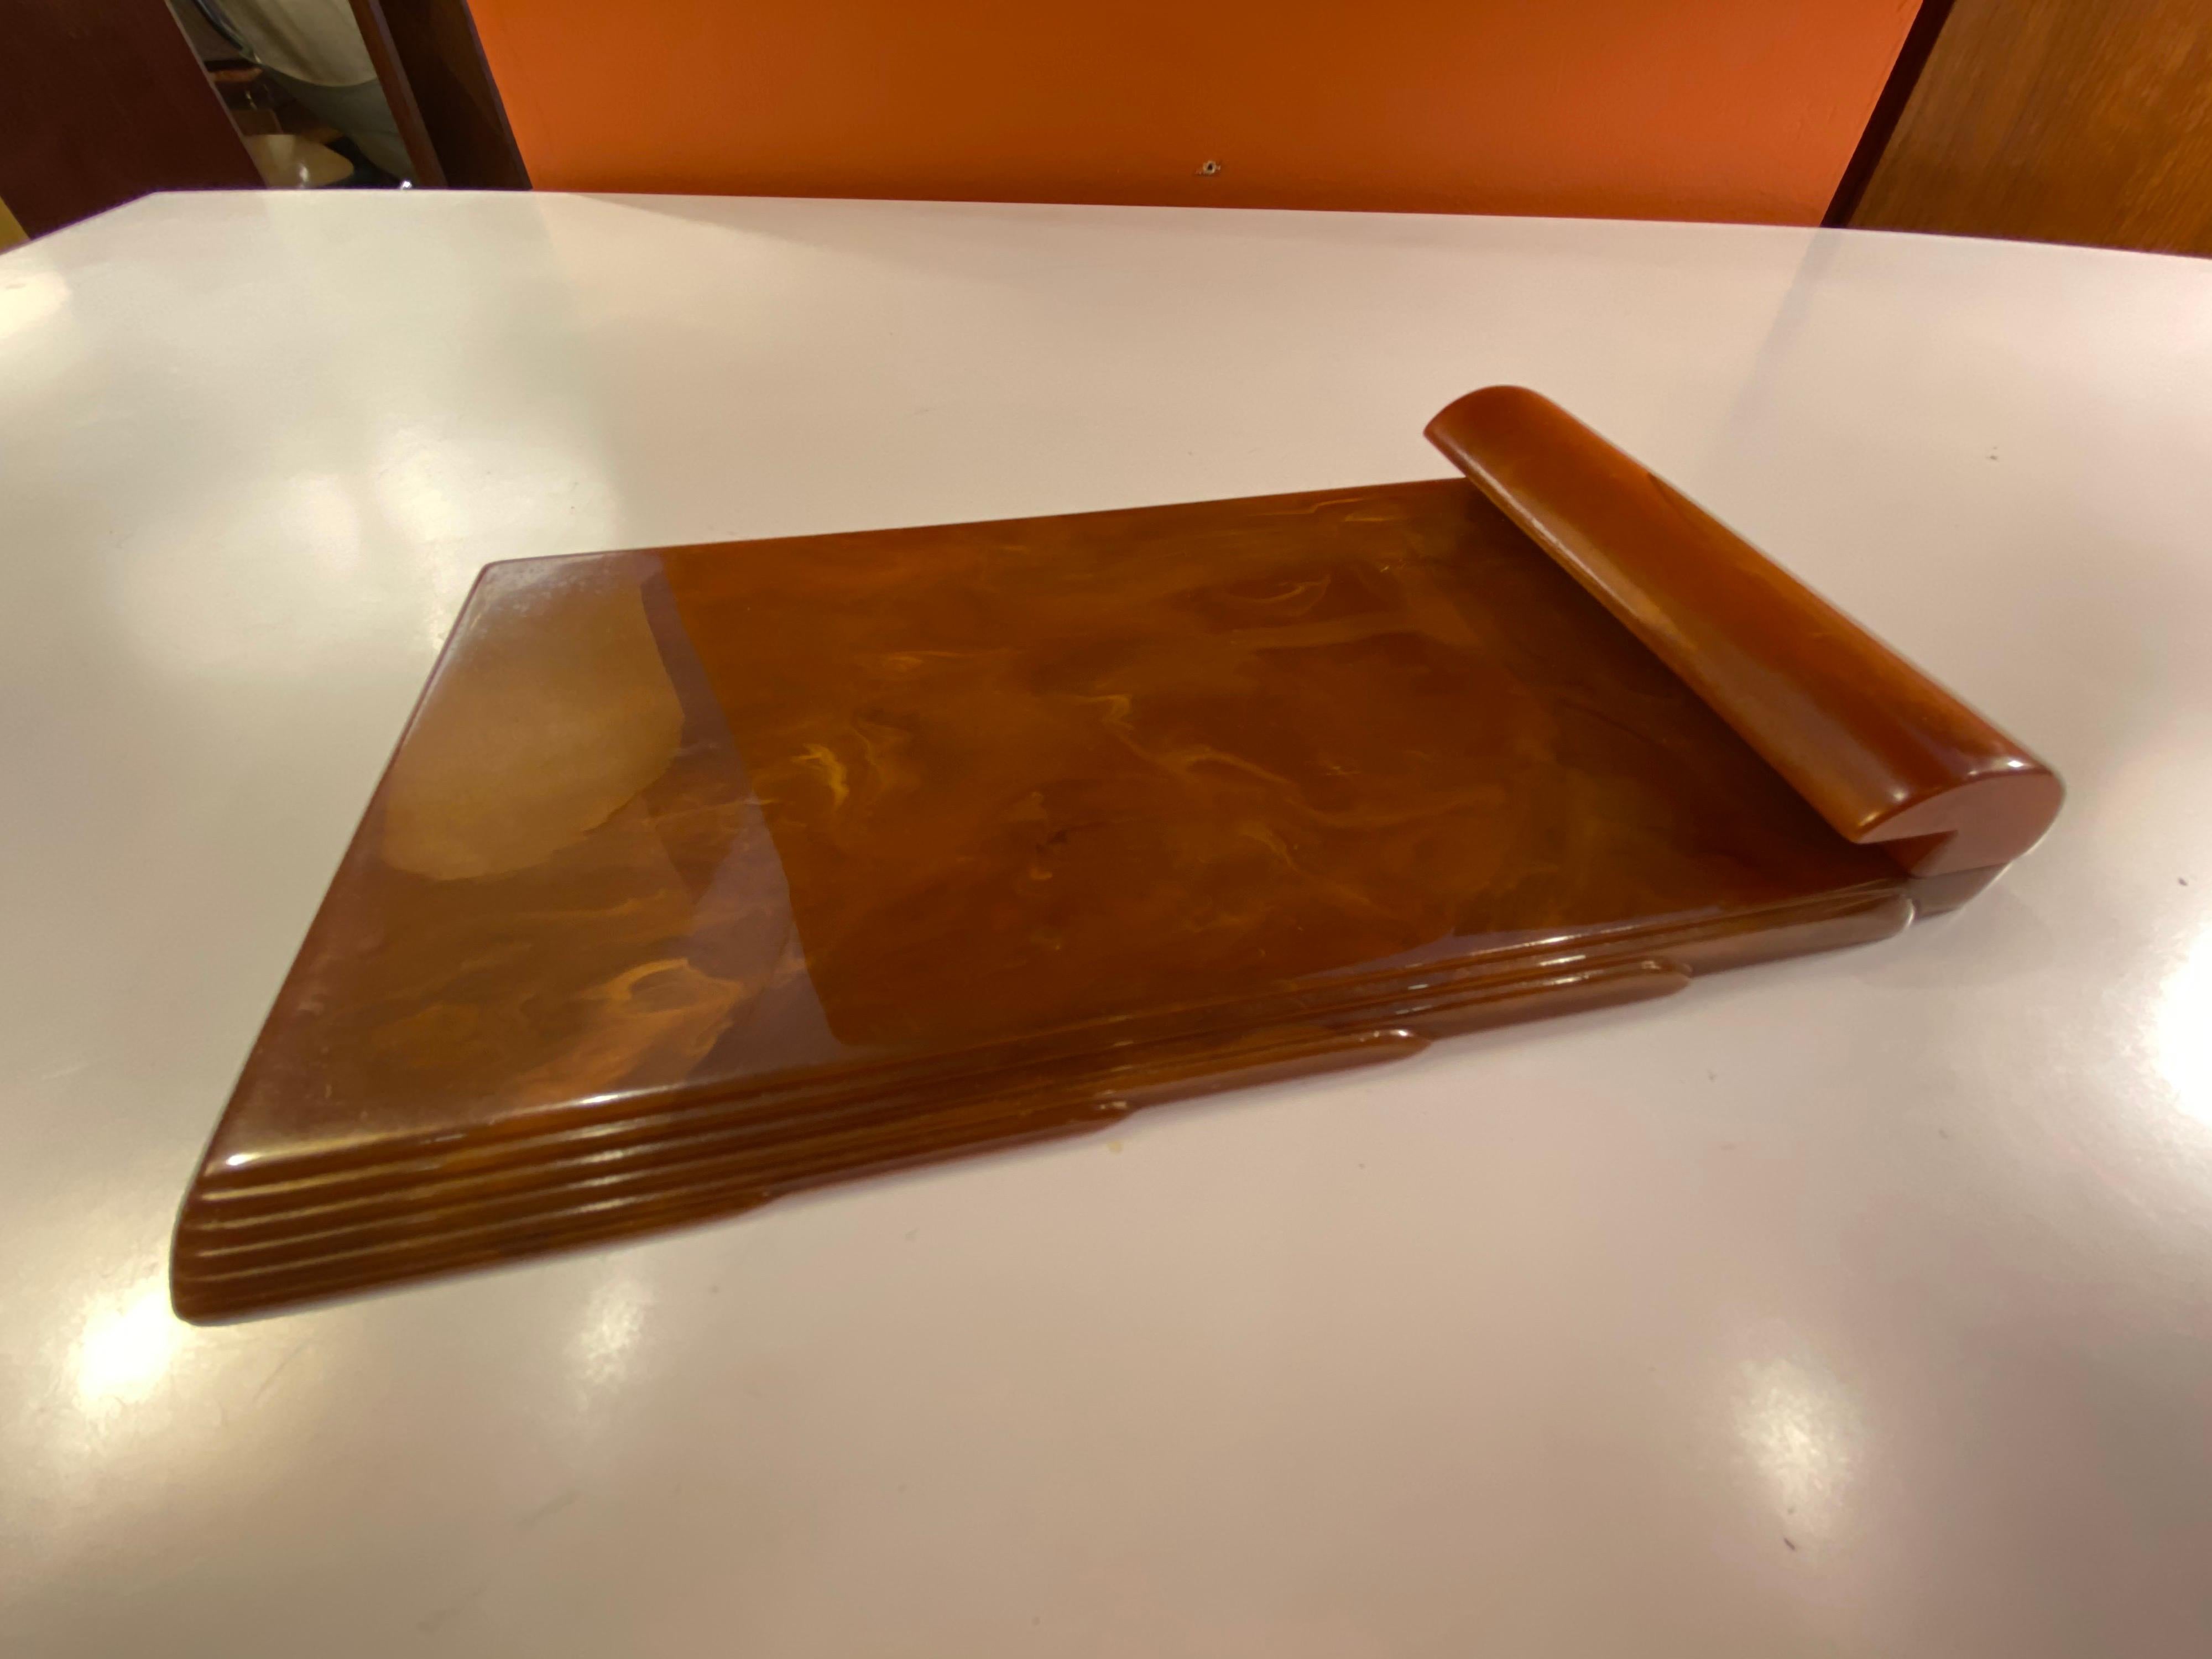 Carvacraft butterscotch Bakelite note pad holder. In very nice shape with streamline styling to sides. Marked on bottom Carvacraft.